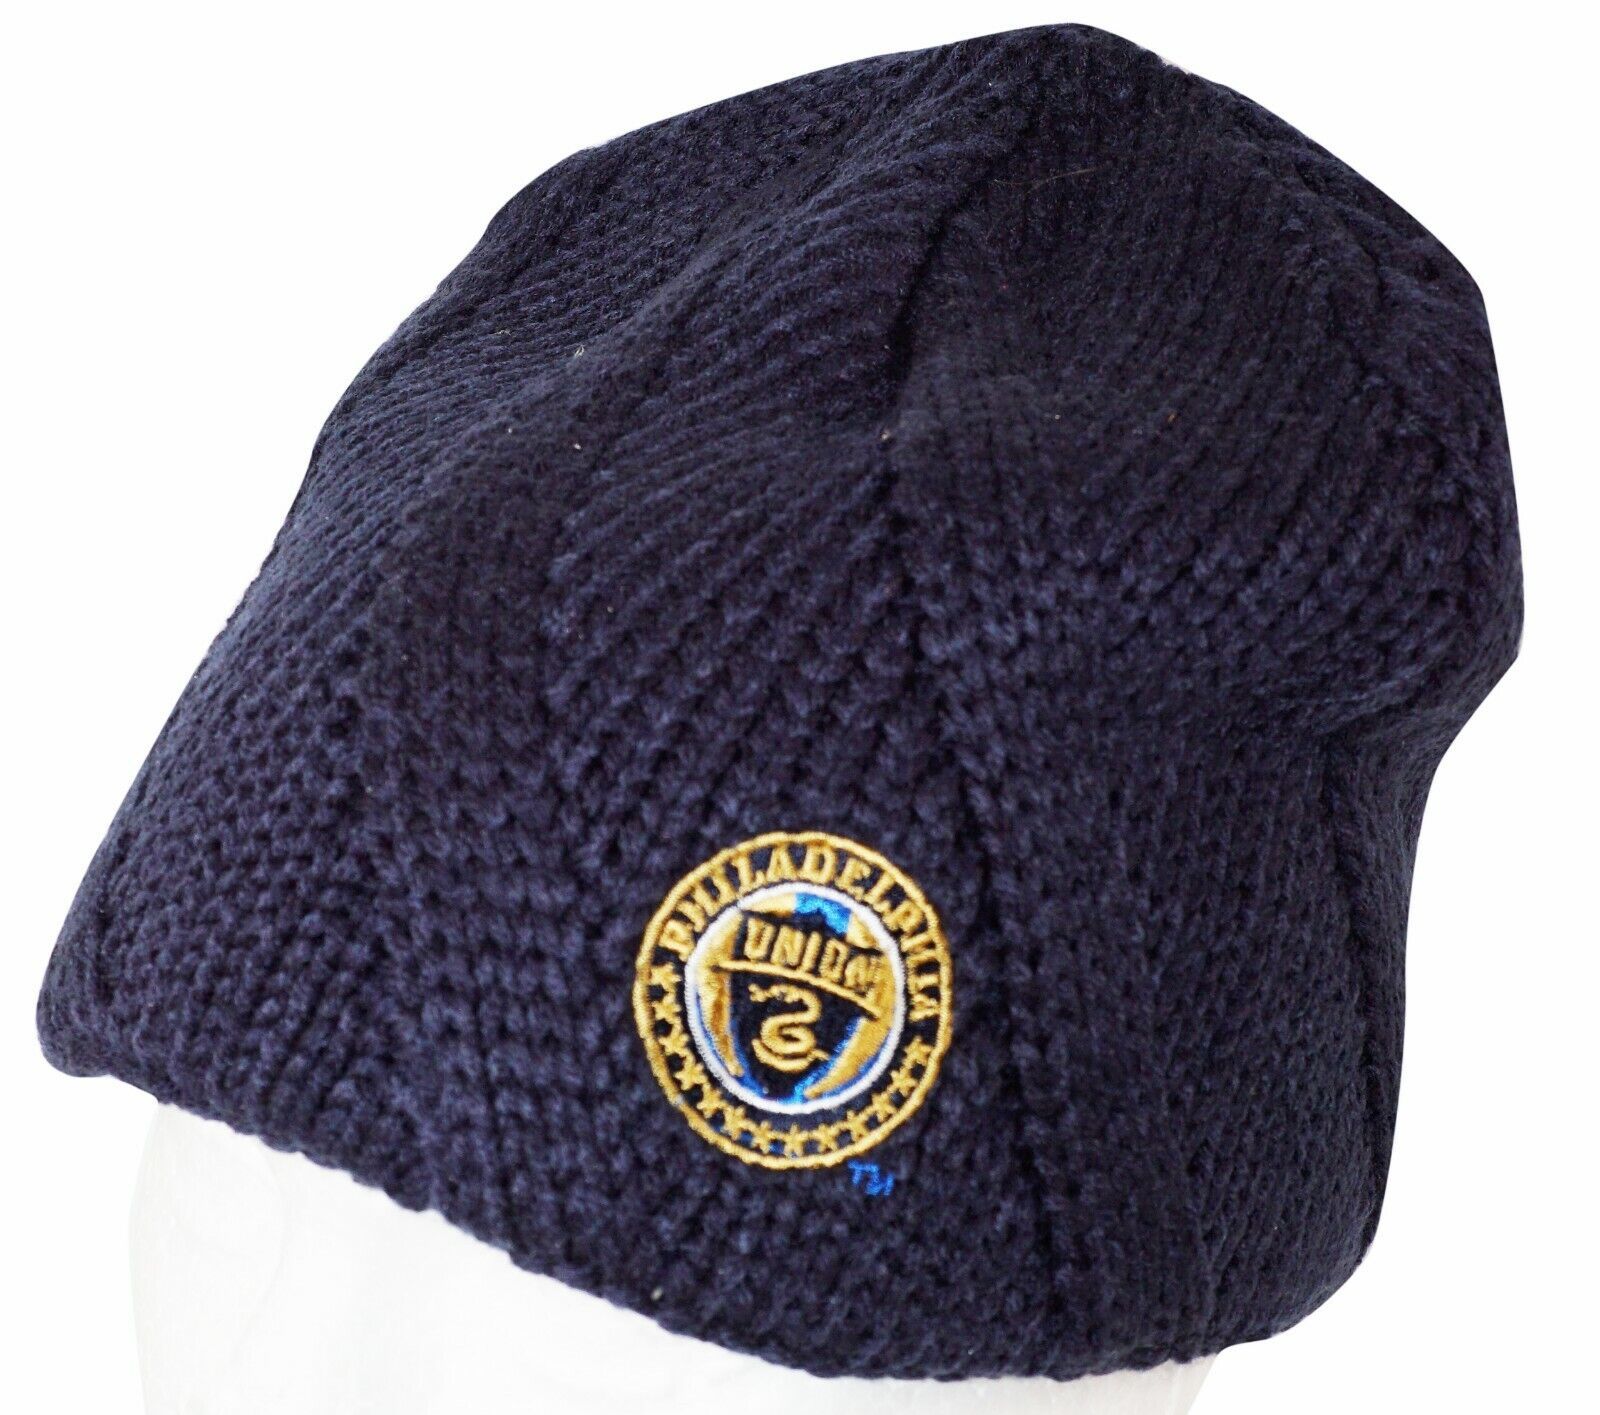 Primary image for Philadelphia Union MLS Soccer - Dark Blue Beanie Cap - One Size Fits Most 2012